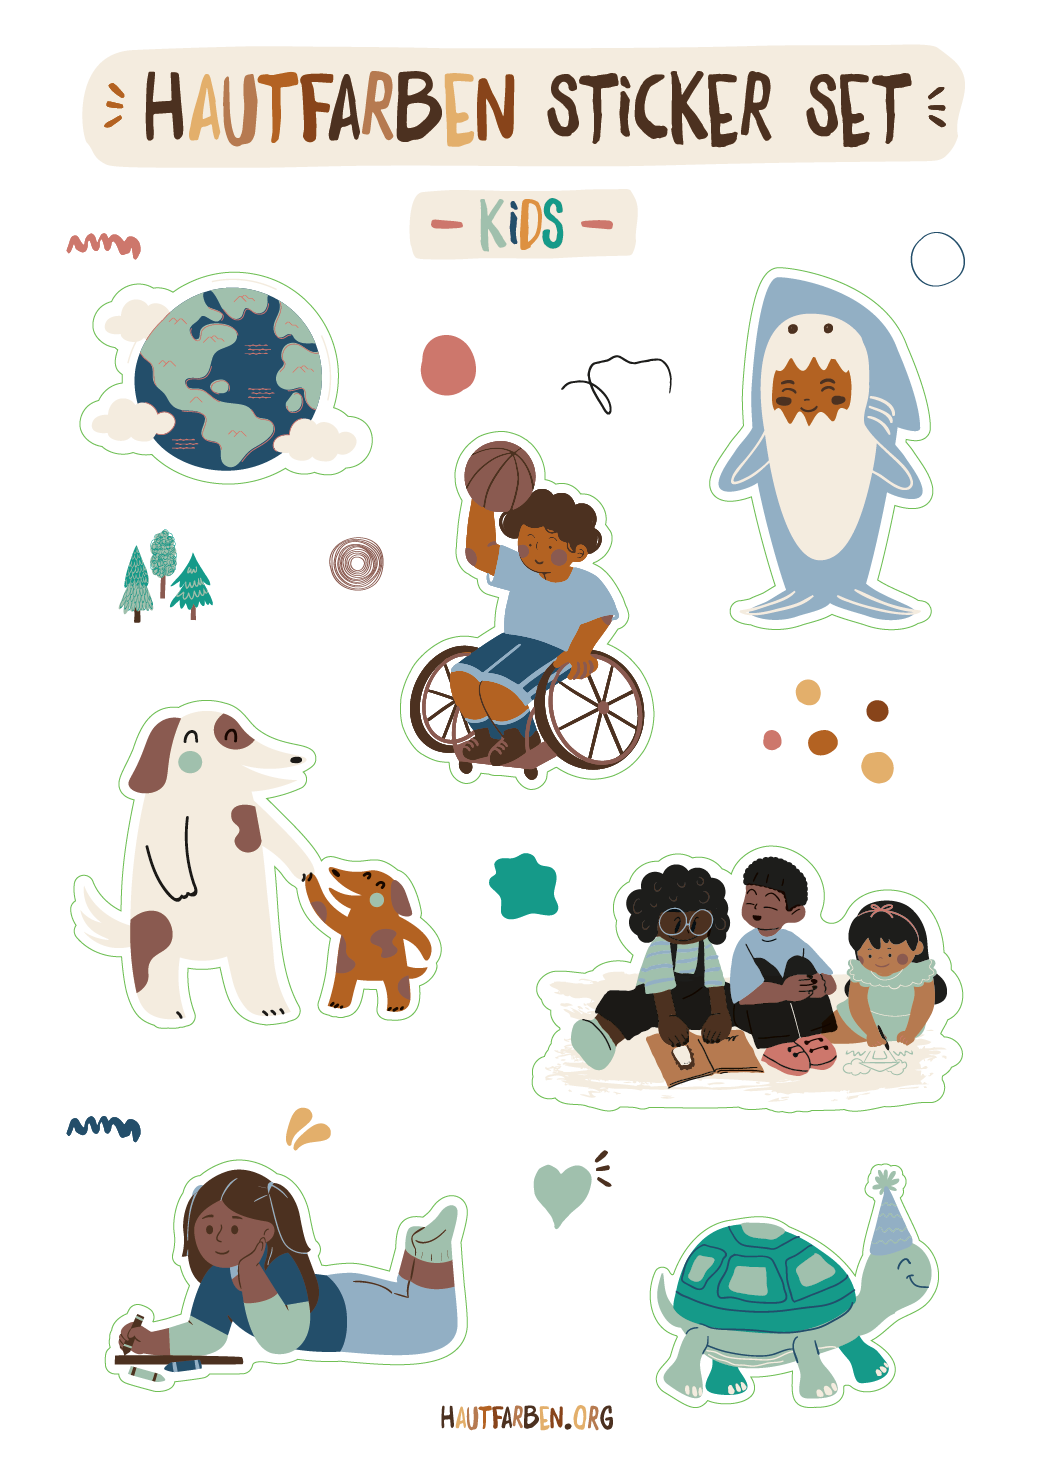 Sticker set "Stickers for everyone"